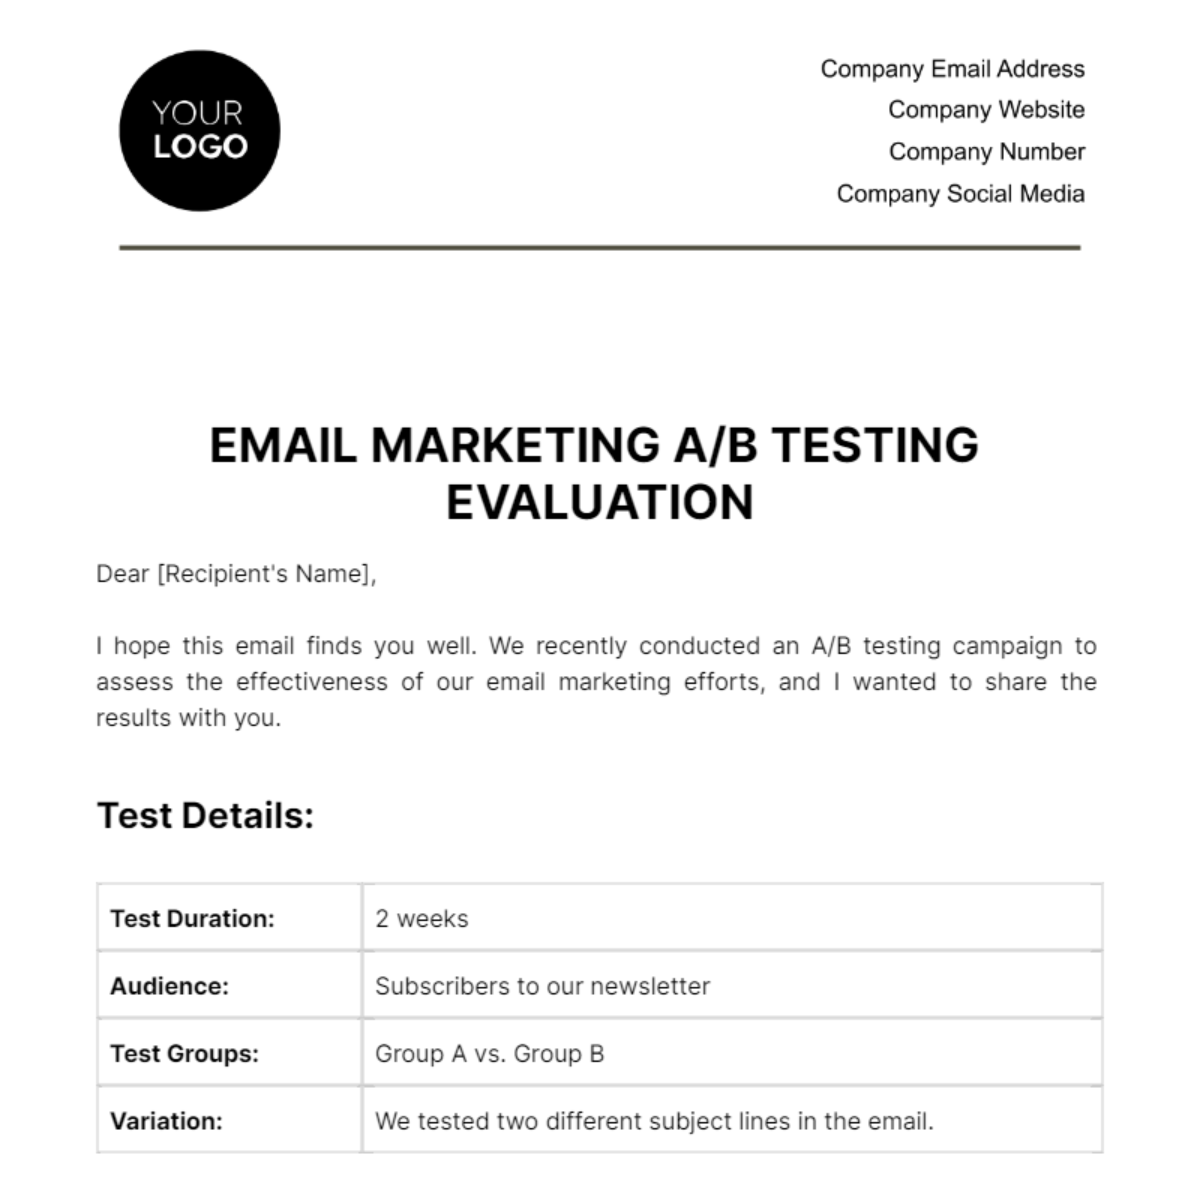 Email Marketing A/B Testing Evaluation Template